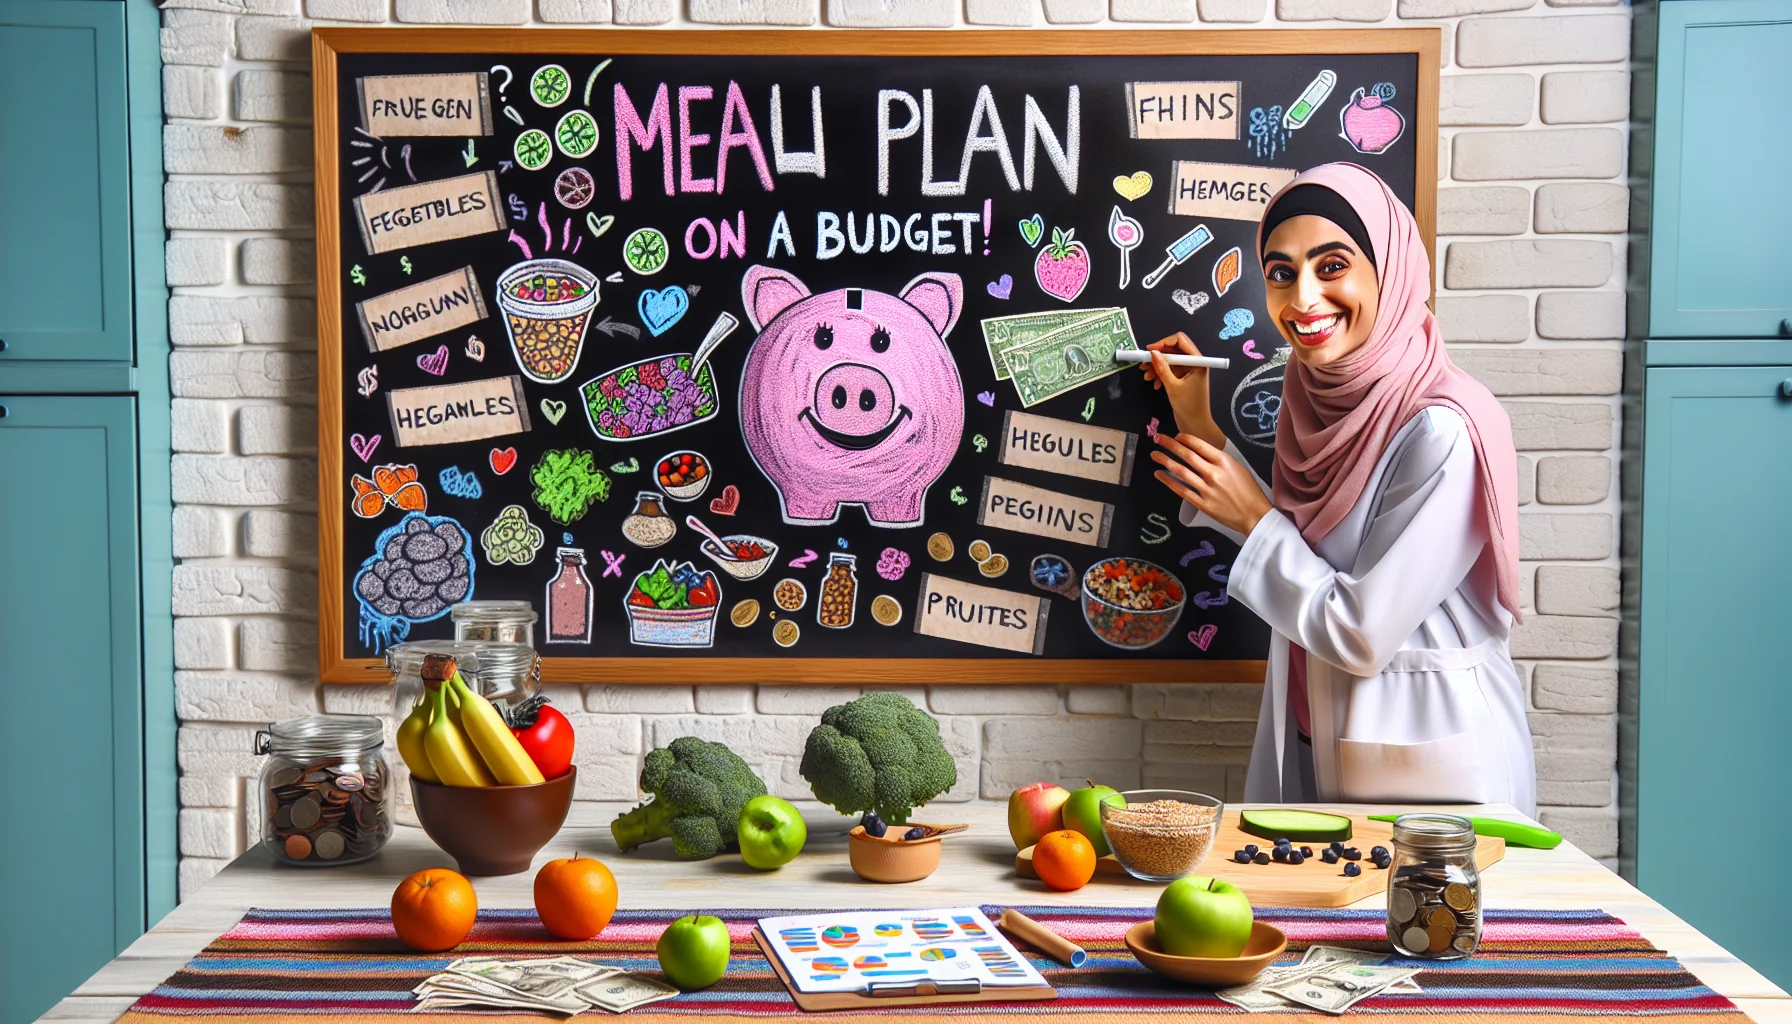 Create a whimsical but realistic scene that showcases key tips for planning a menu on a budget, aimed at promoting healthy eating. The scene may be a home kitchen, with a Middle Eastern woman smiling as she cleverly organizes a meal plan using a large chalkboard full of colorful doodles, funny notes and cut out pictures of various fruits, vegetables, whole grains, legumes, and lean proteins. A quirky piggy bank on the counter is filled with coins and dollar bills, next to a bowl of fresh fruits. It clearly communicates the message that healthy eating can be fun and cost-effective.